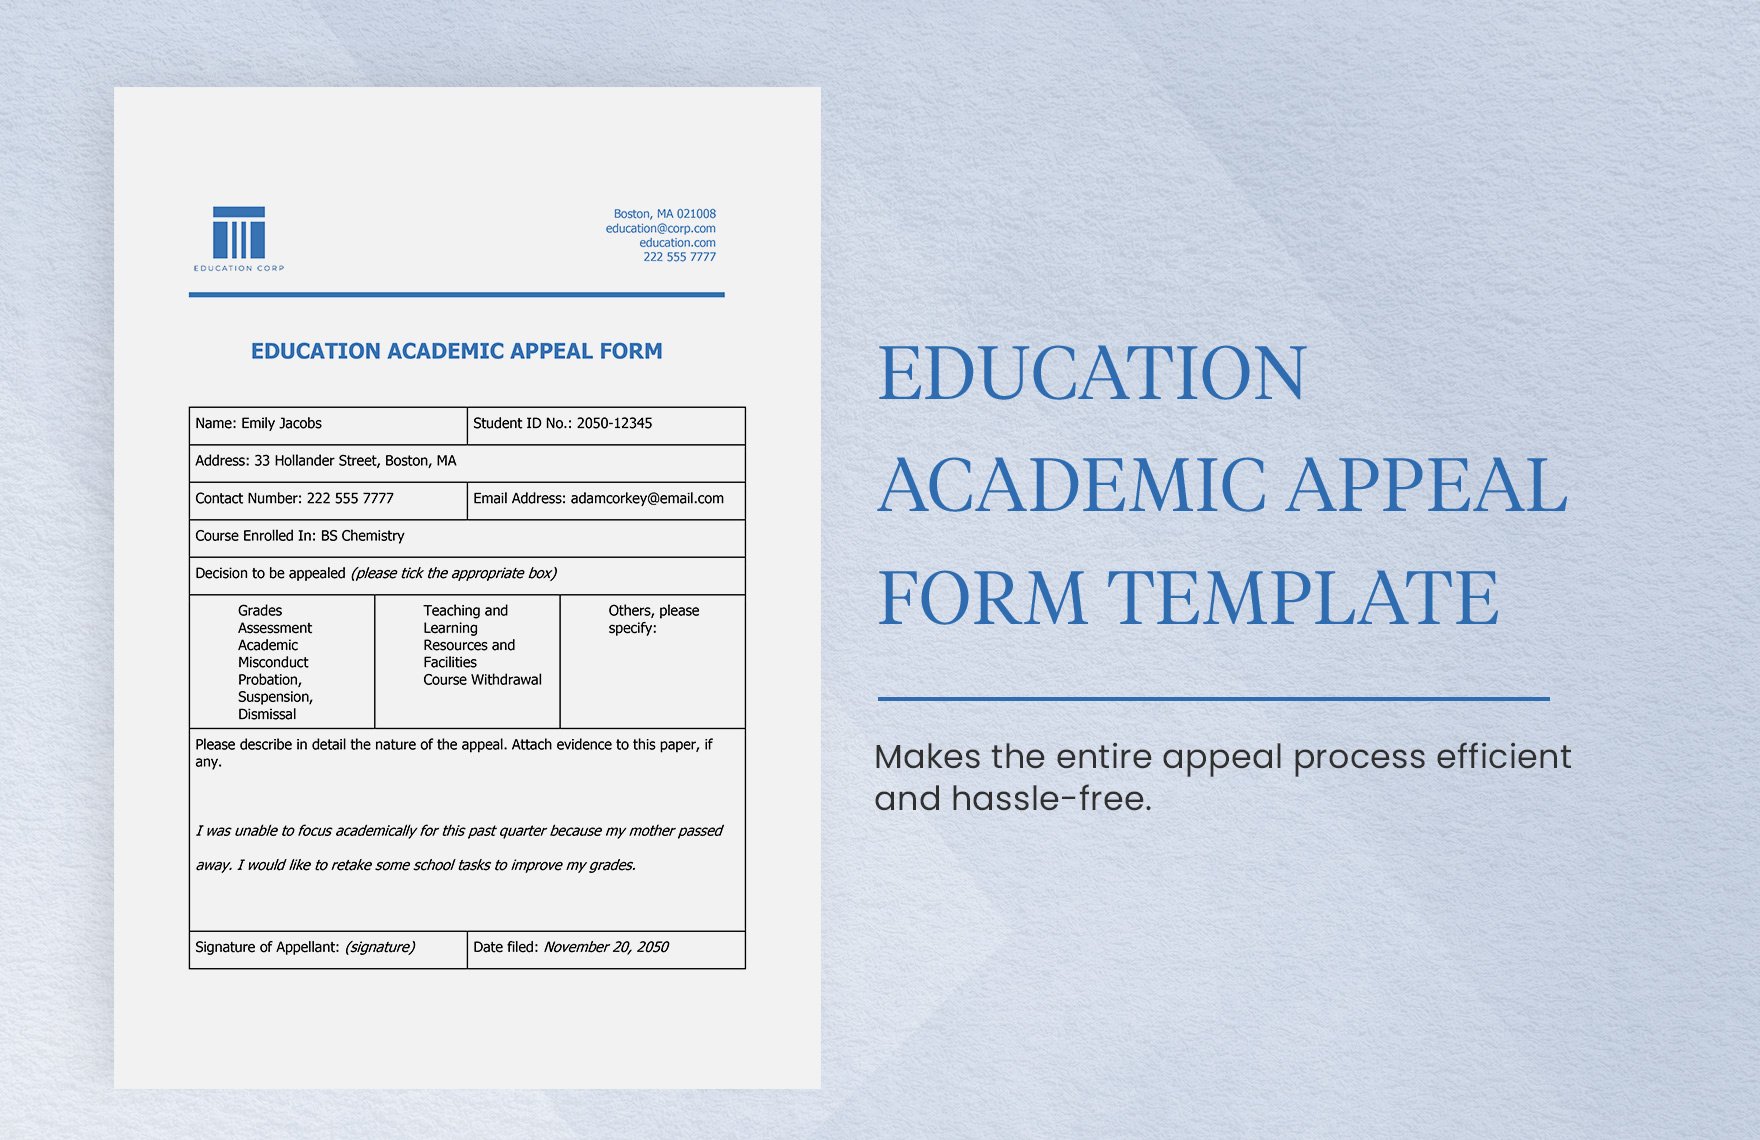 Education Academic Appeal Form Template in Word Google Docs Download